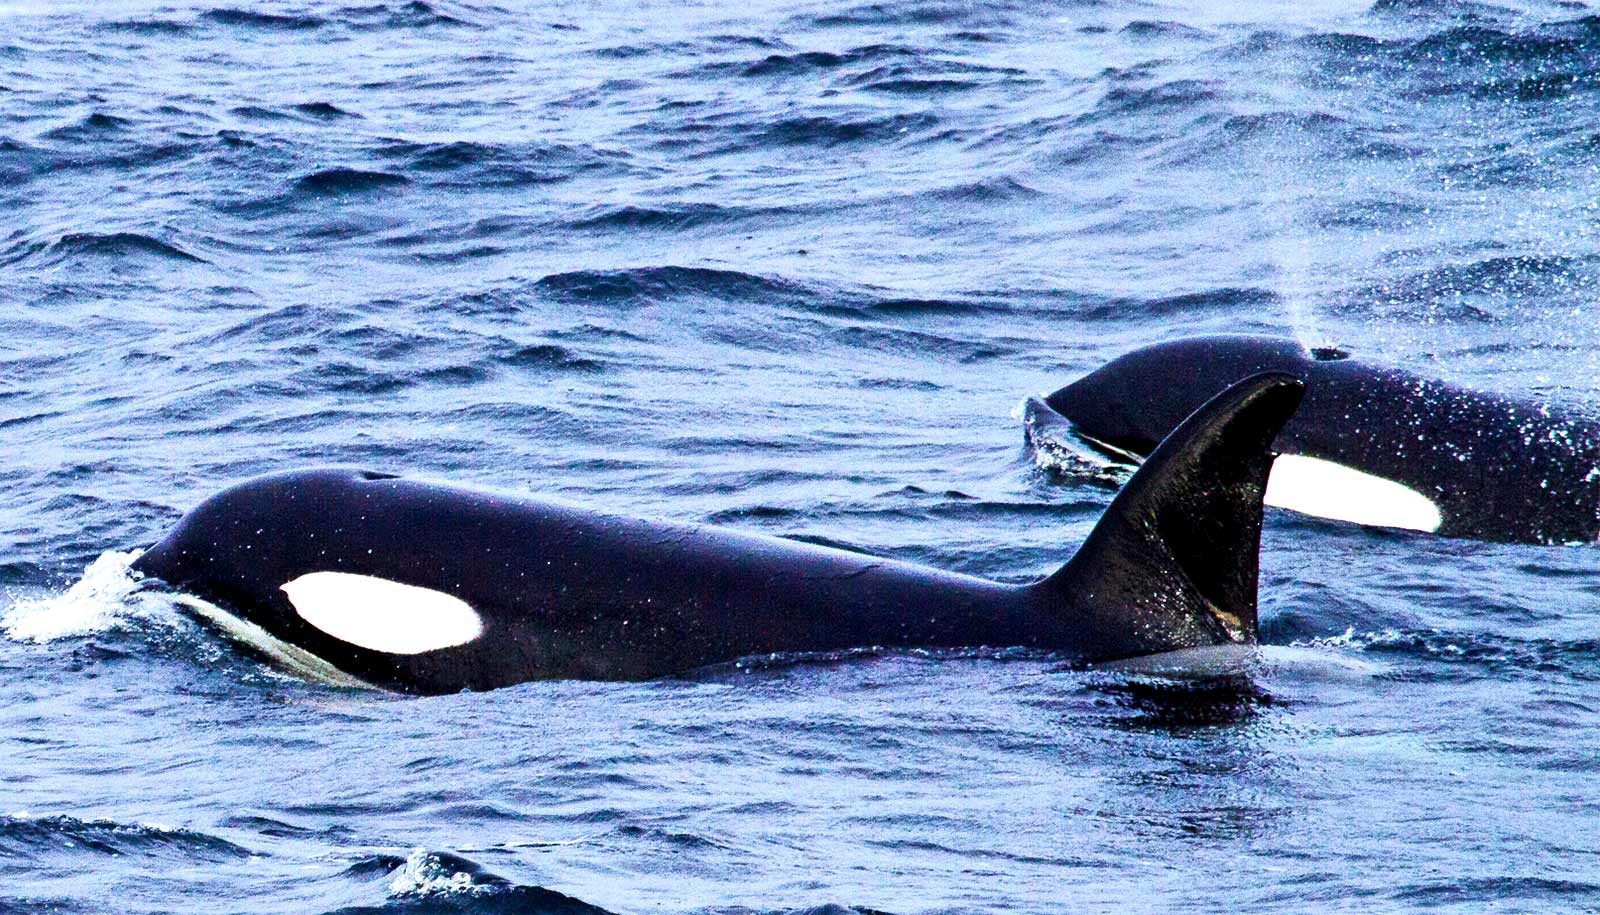 https://www.futurity.org/wp/wp-content/uploads/2021/05/orcas-killer-whales-pcbs-1600.jpg